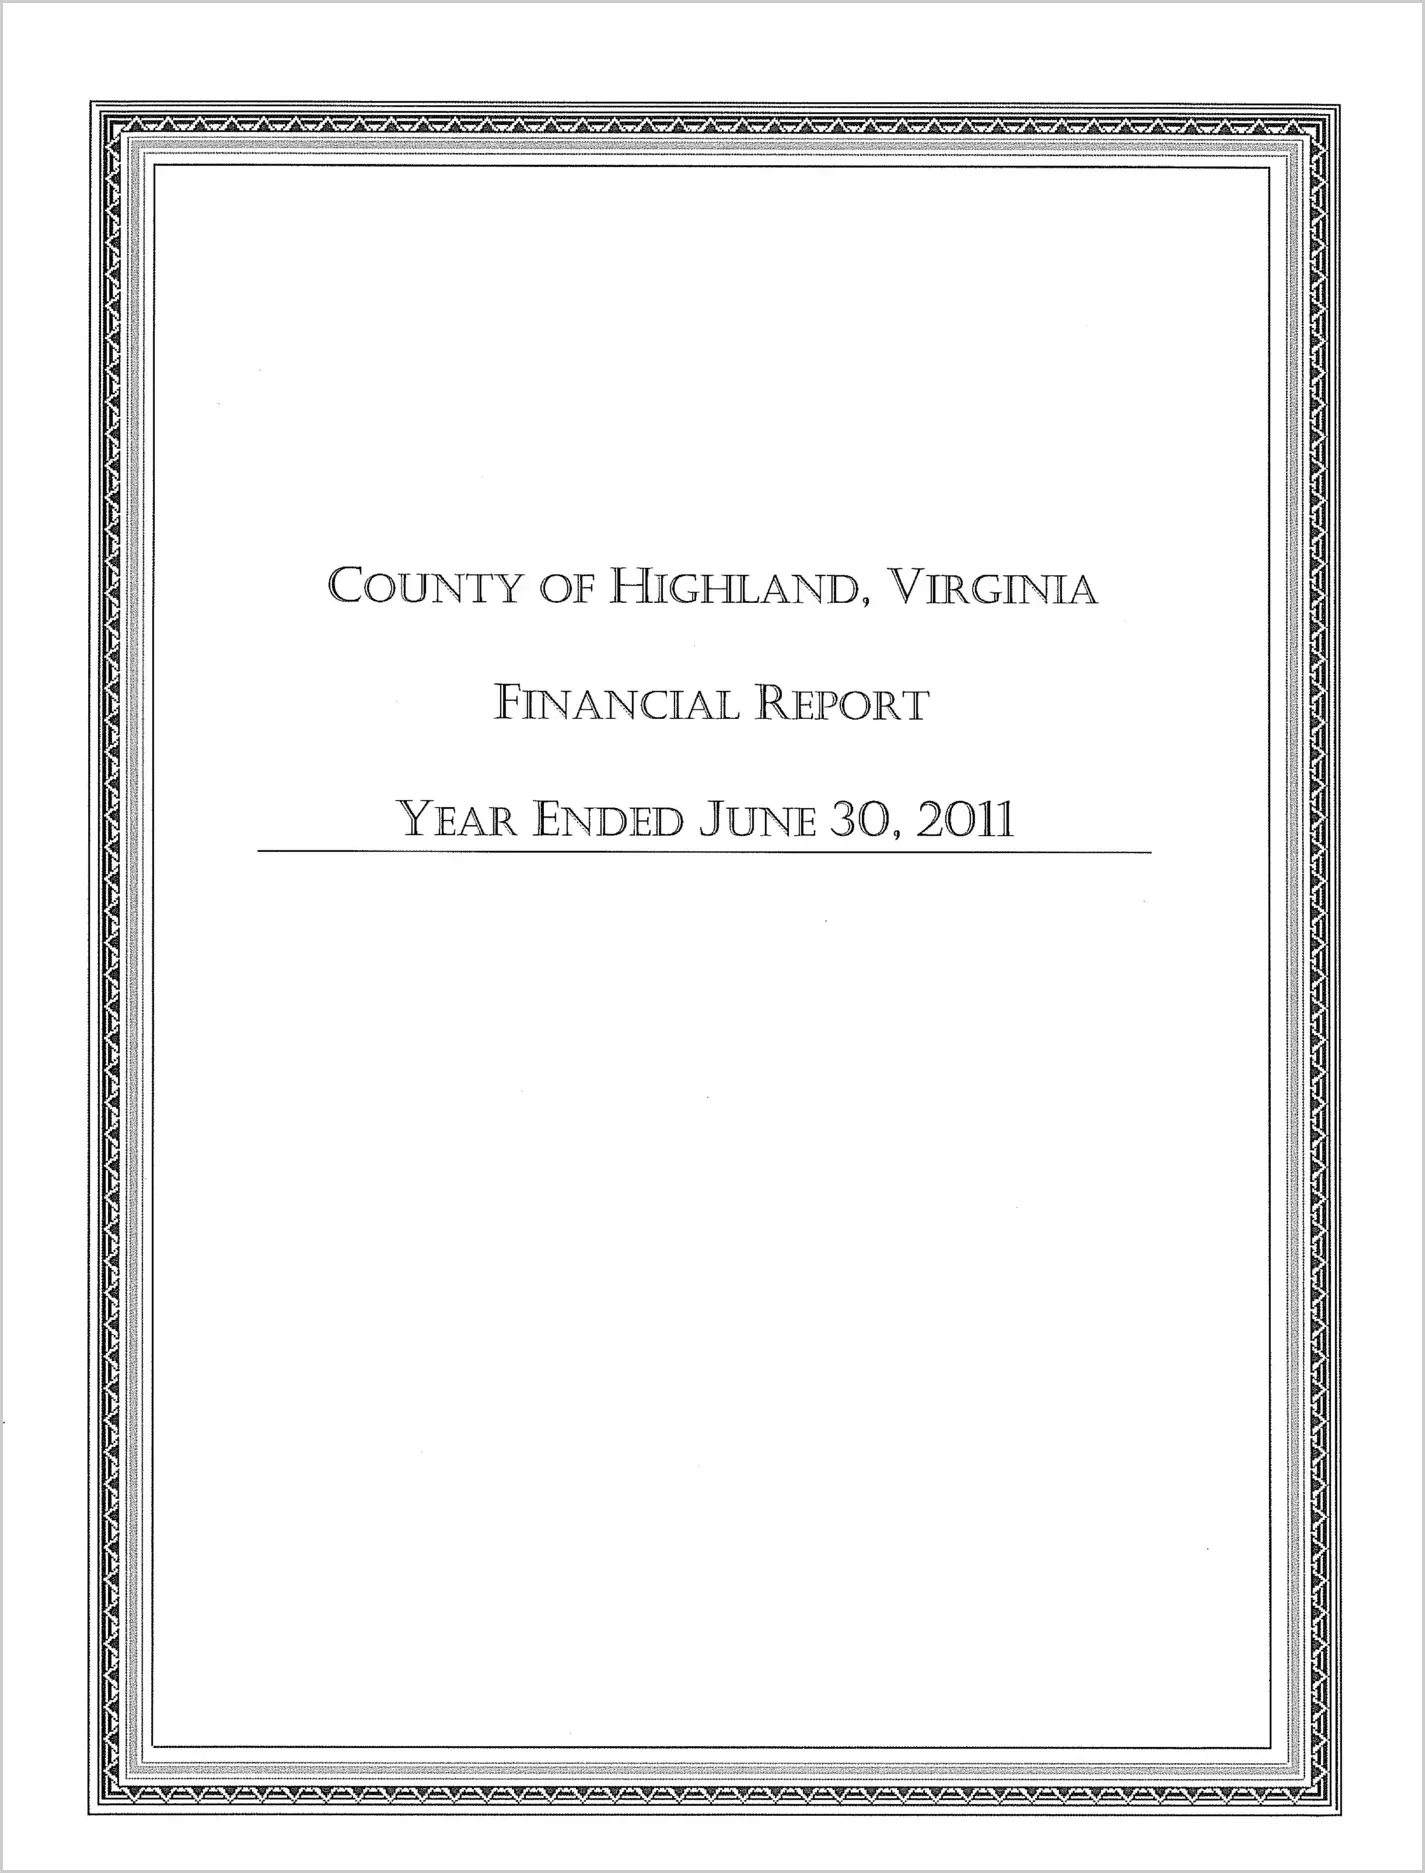 2011 Annual Financial Report for County of Highland